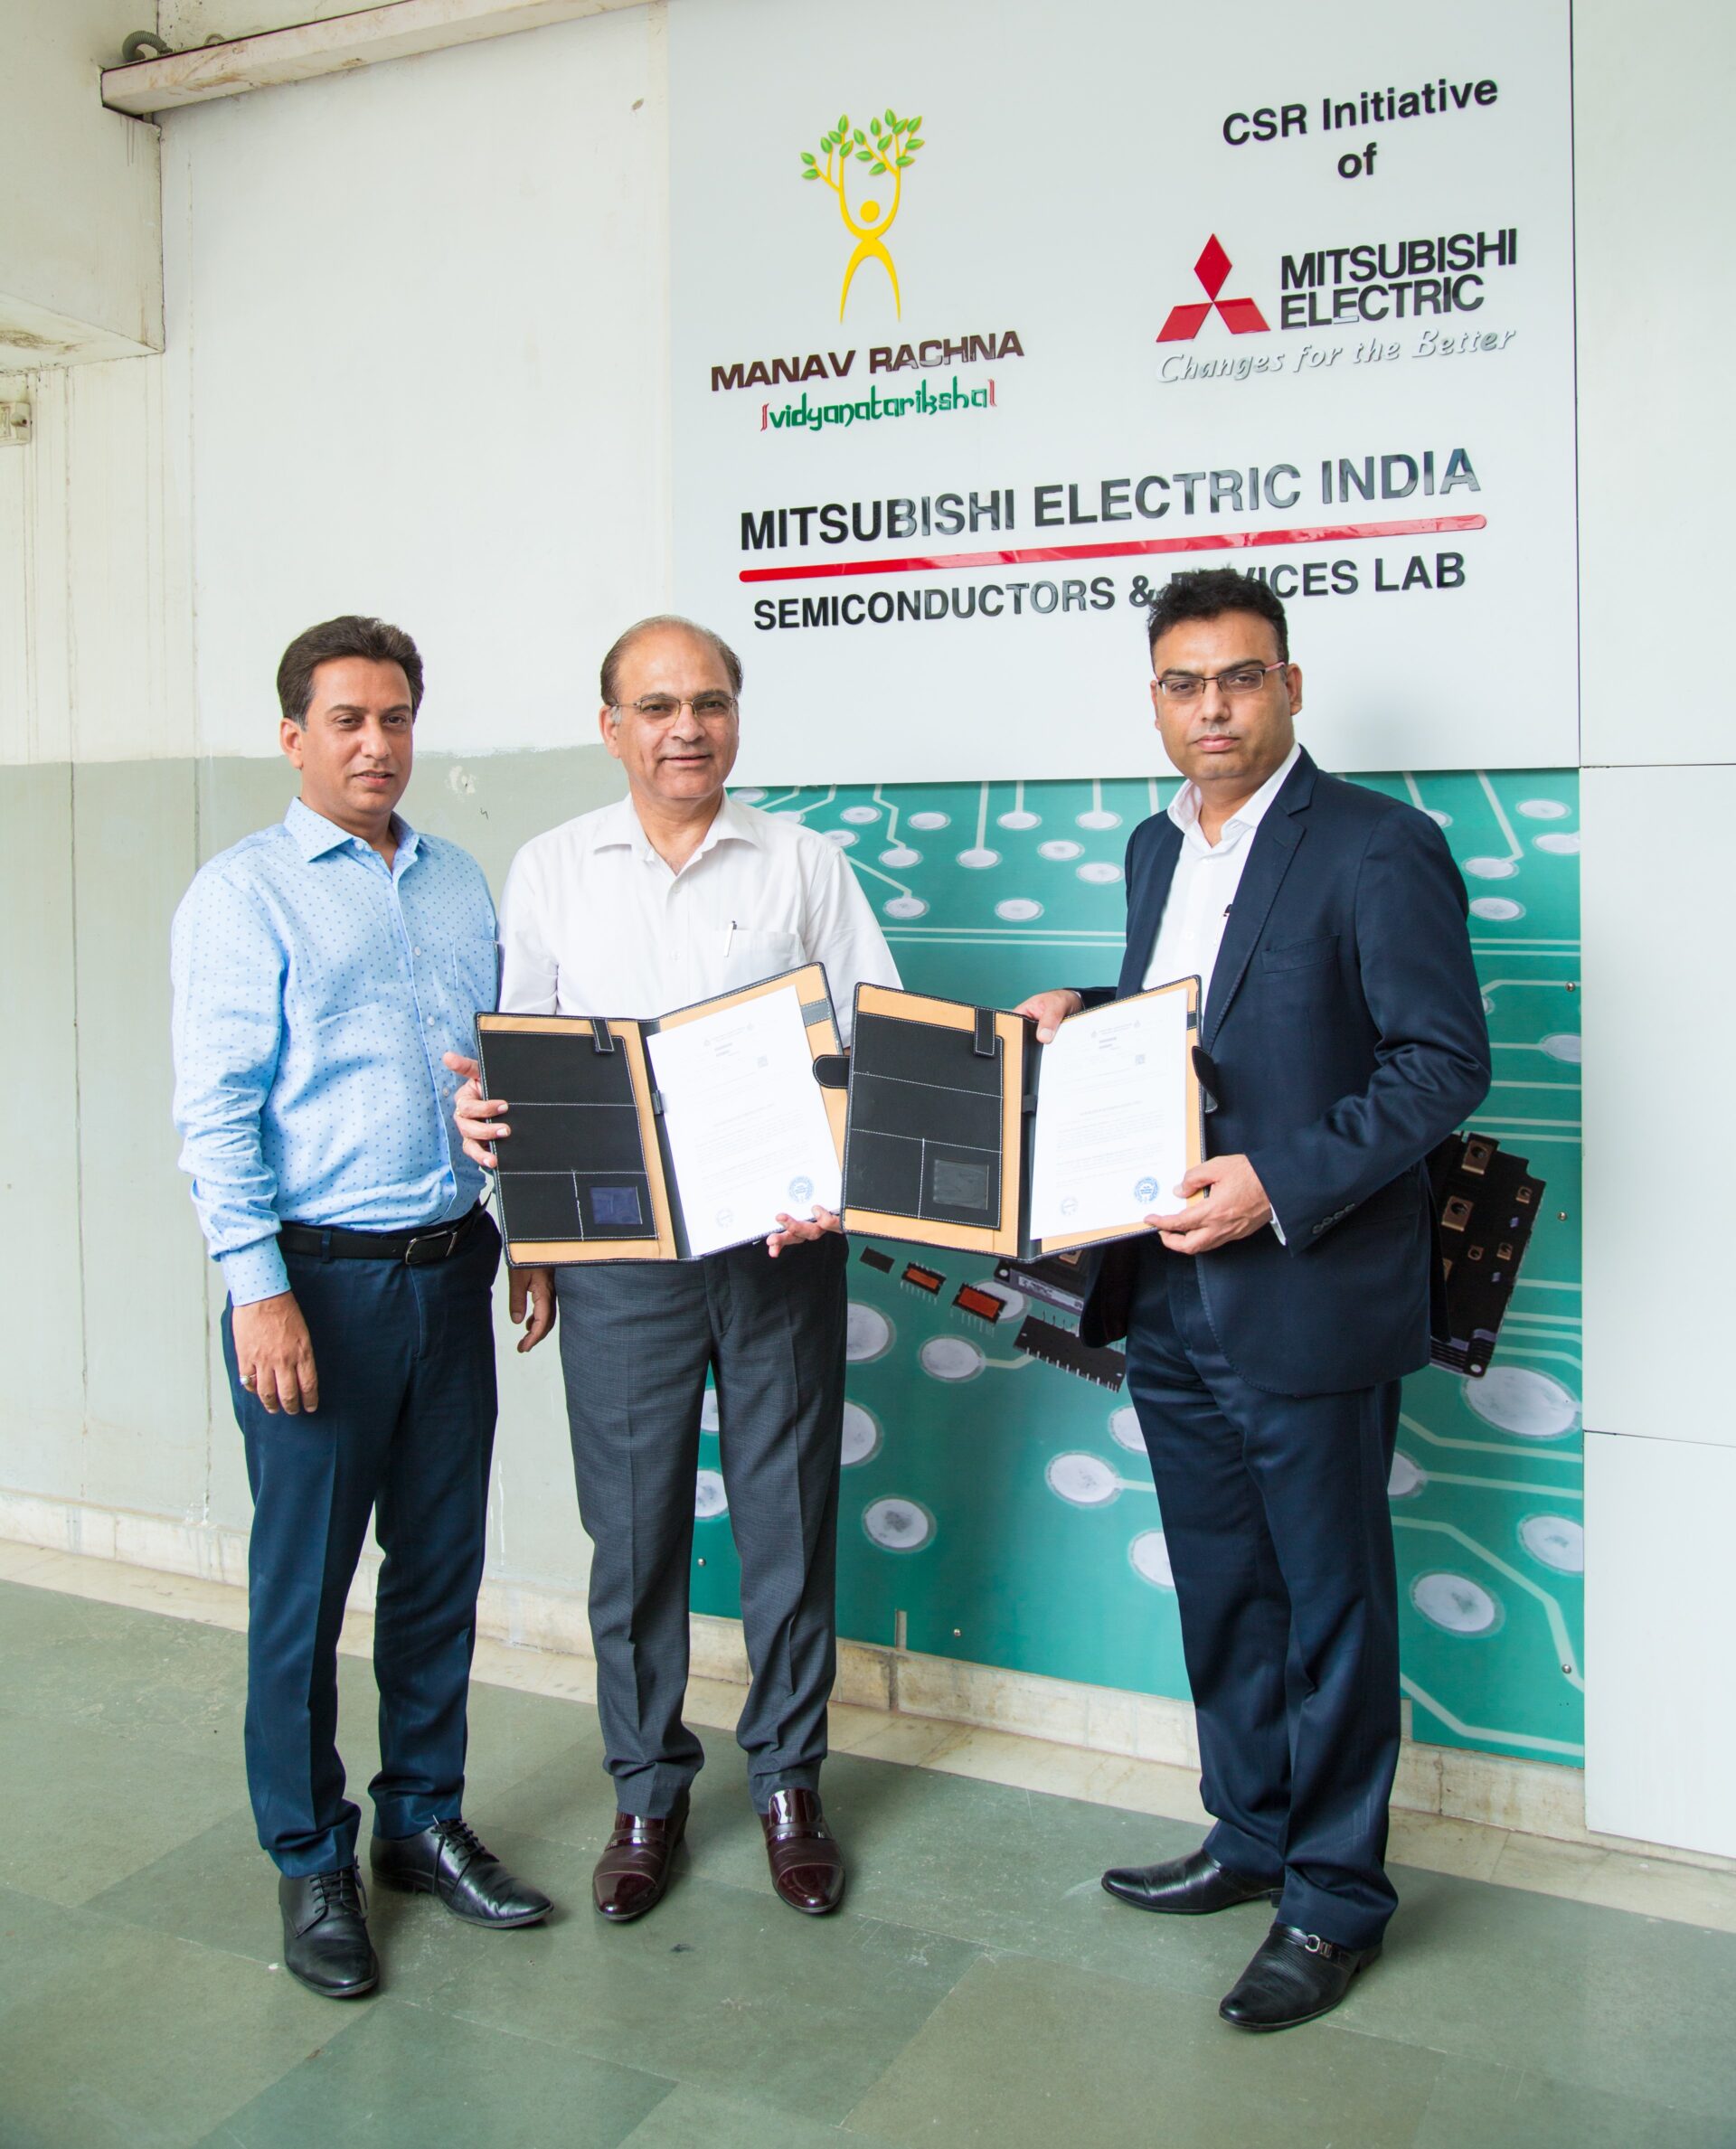 Mitsubishi Electric Initiates Semiconductor and Devices Lab Program